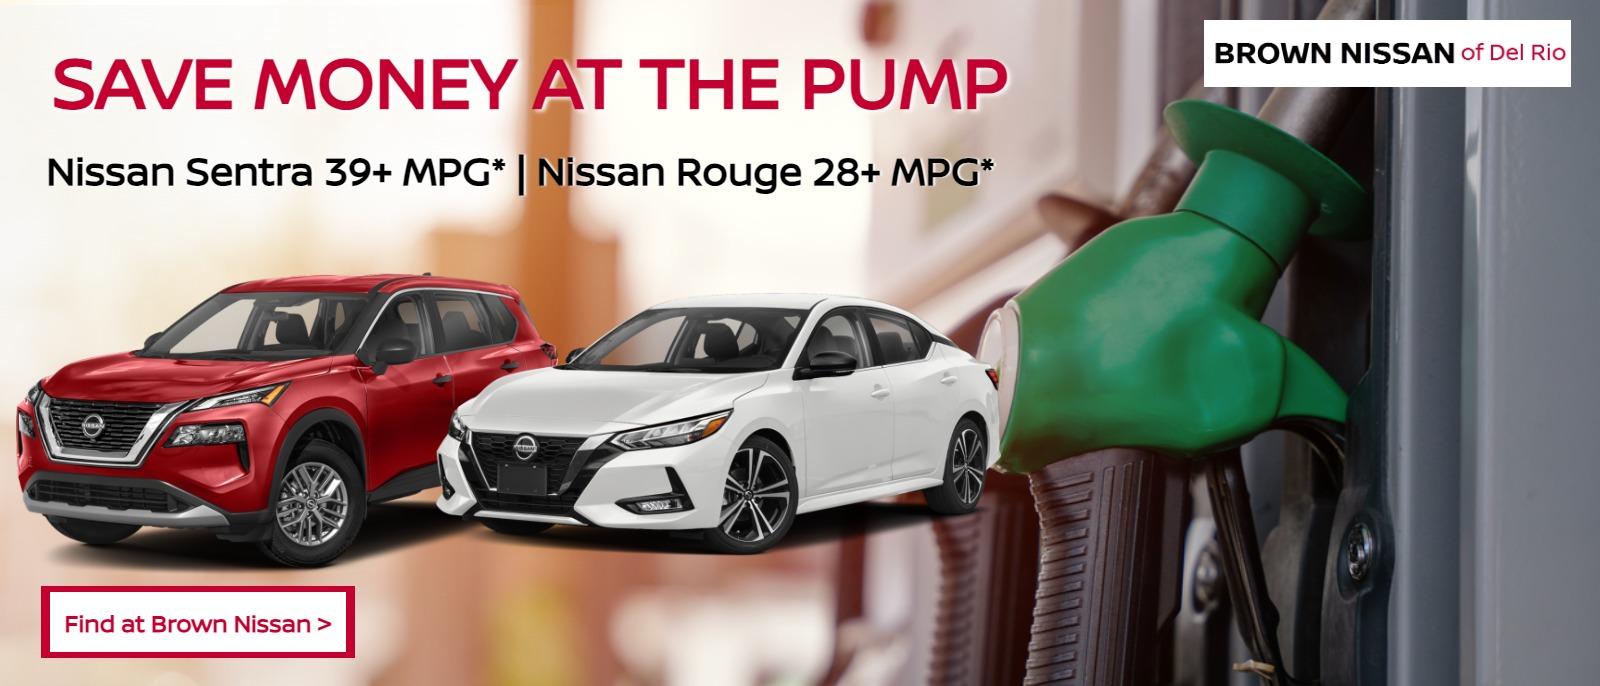 SAVE MONEY AT THE PUMP
Nissan Sentra gets over 39 MPG* & Nissan Rouge gets over 28 MPG*
Find at Brown Nissan >